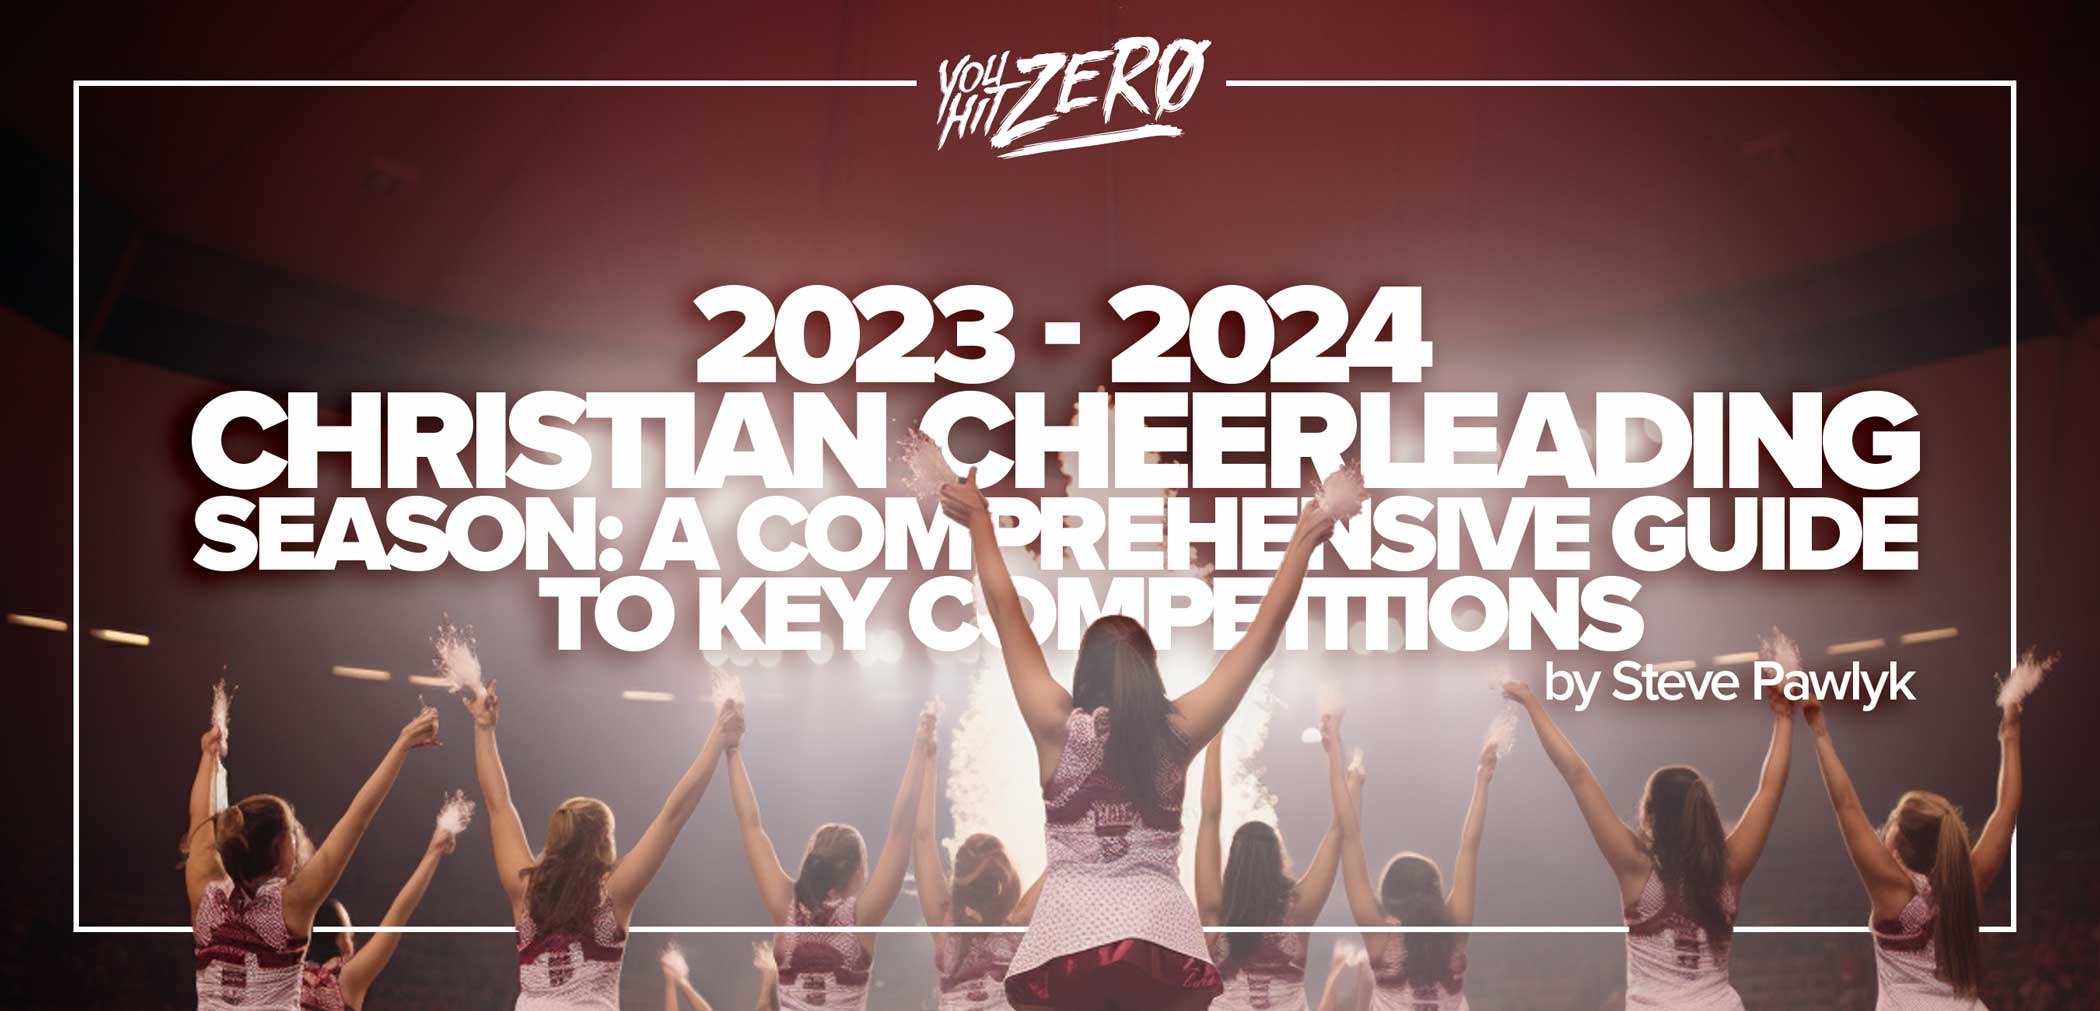 2023-2024-Christian-Cheerleading-Season--A-Comprehensive-Guide-to-Key-Competitions